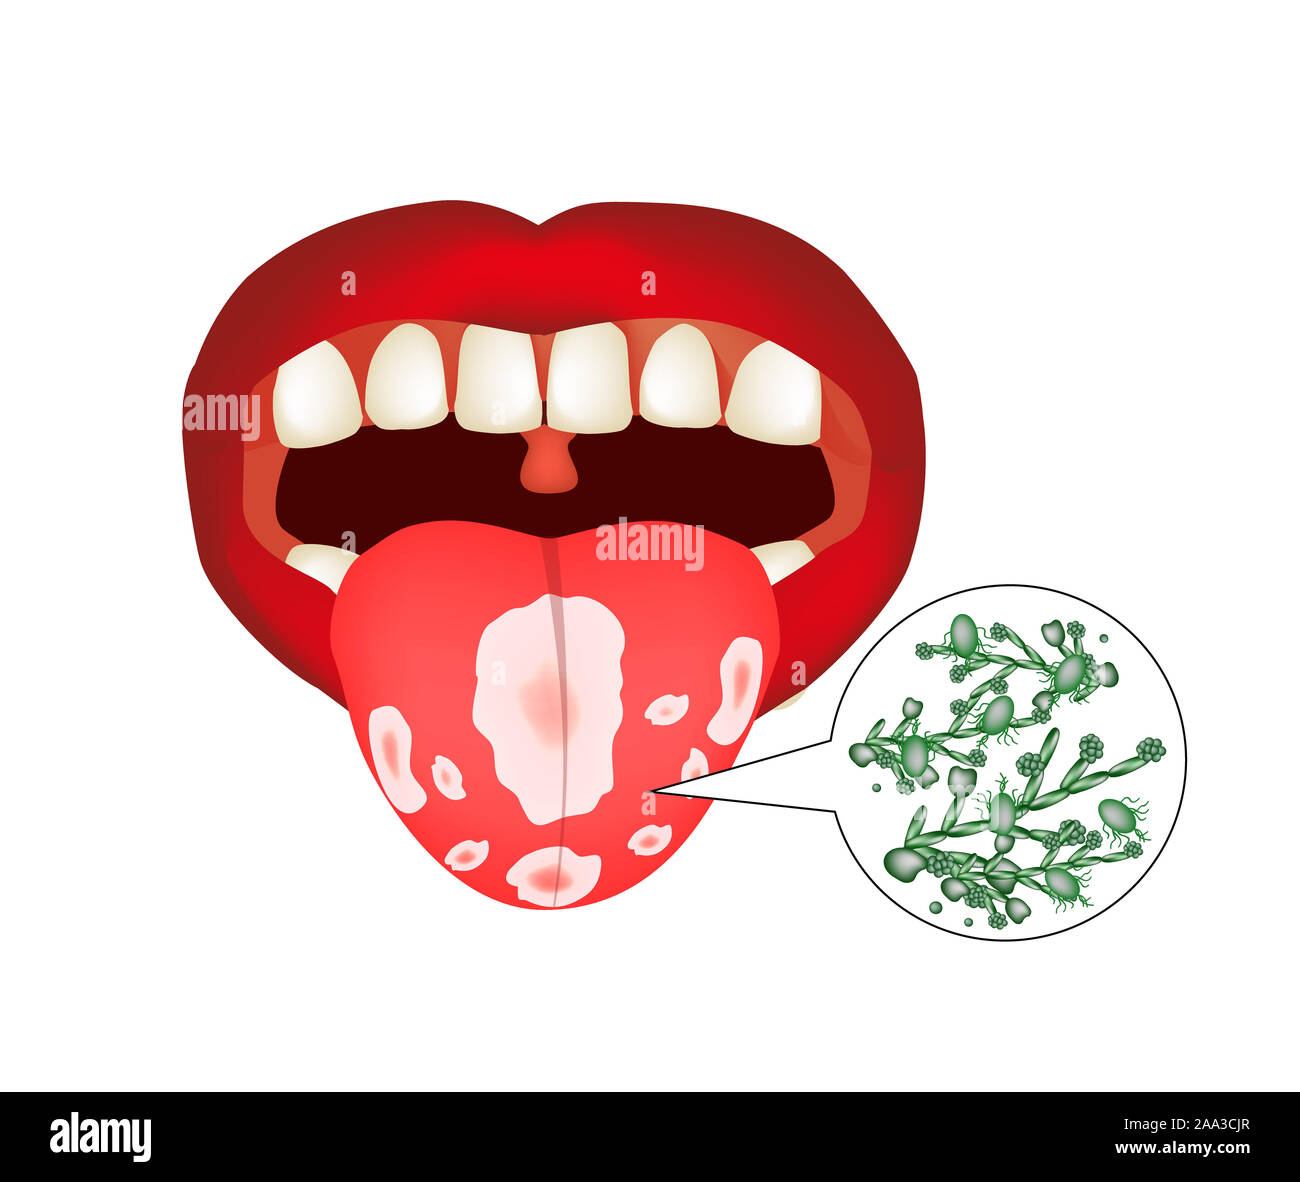 Oral thrush. Candidiasis on the tongue. Fungus in the mouth. Infographics. illustration on isolated background. Stock Photo